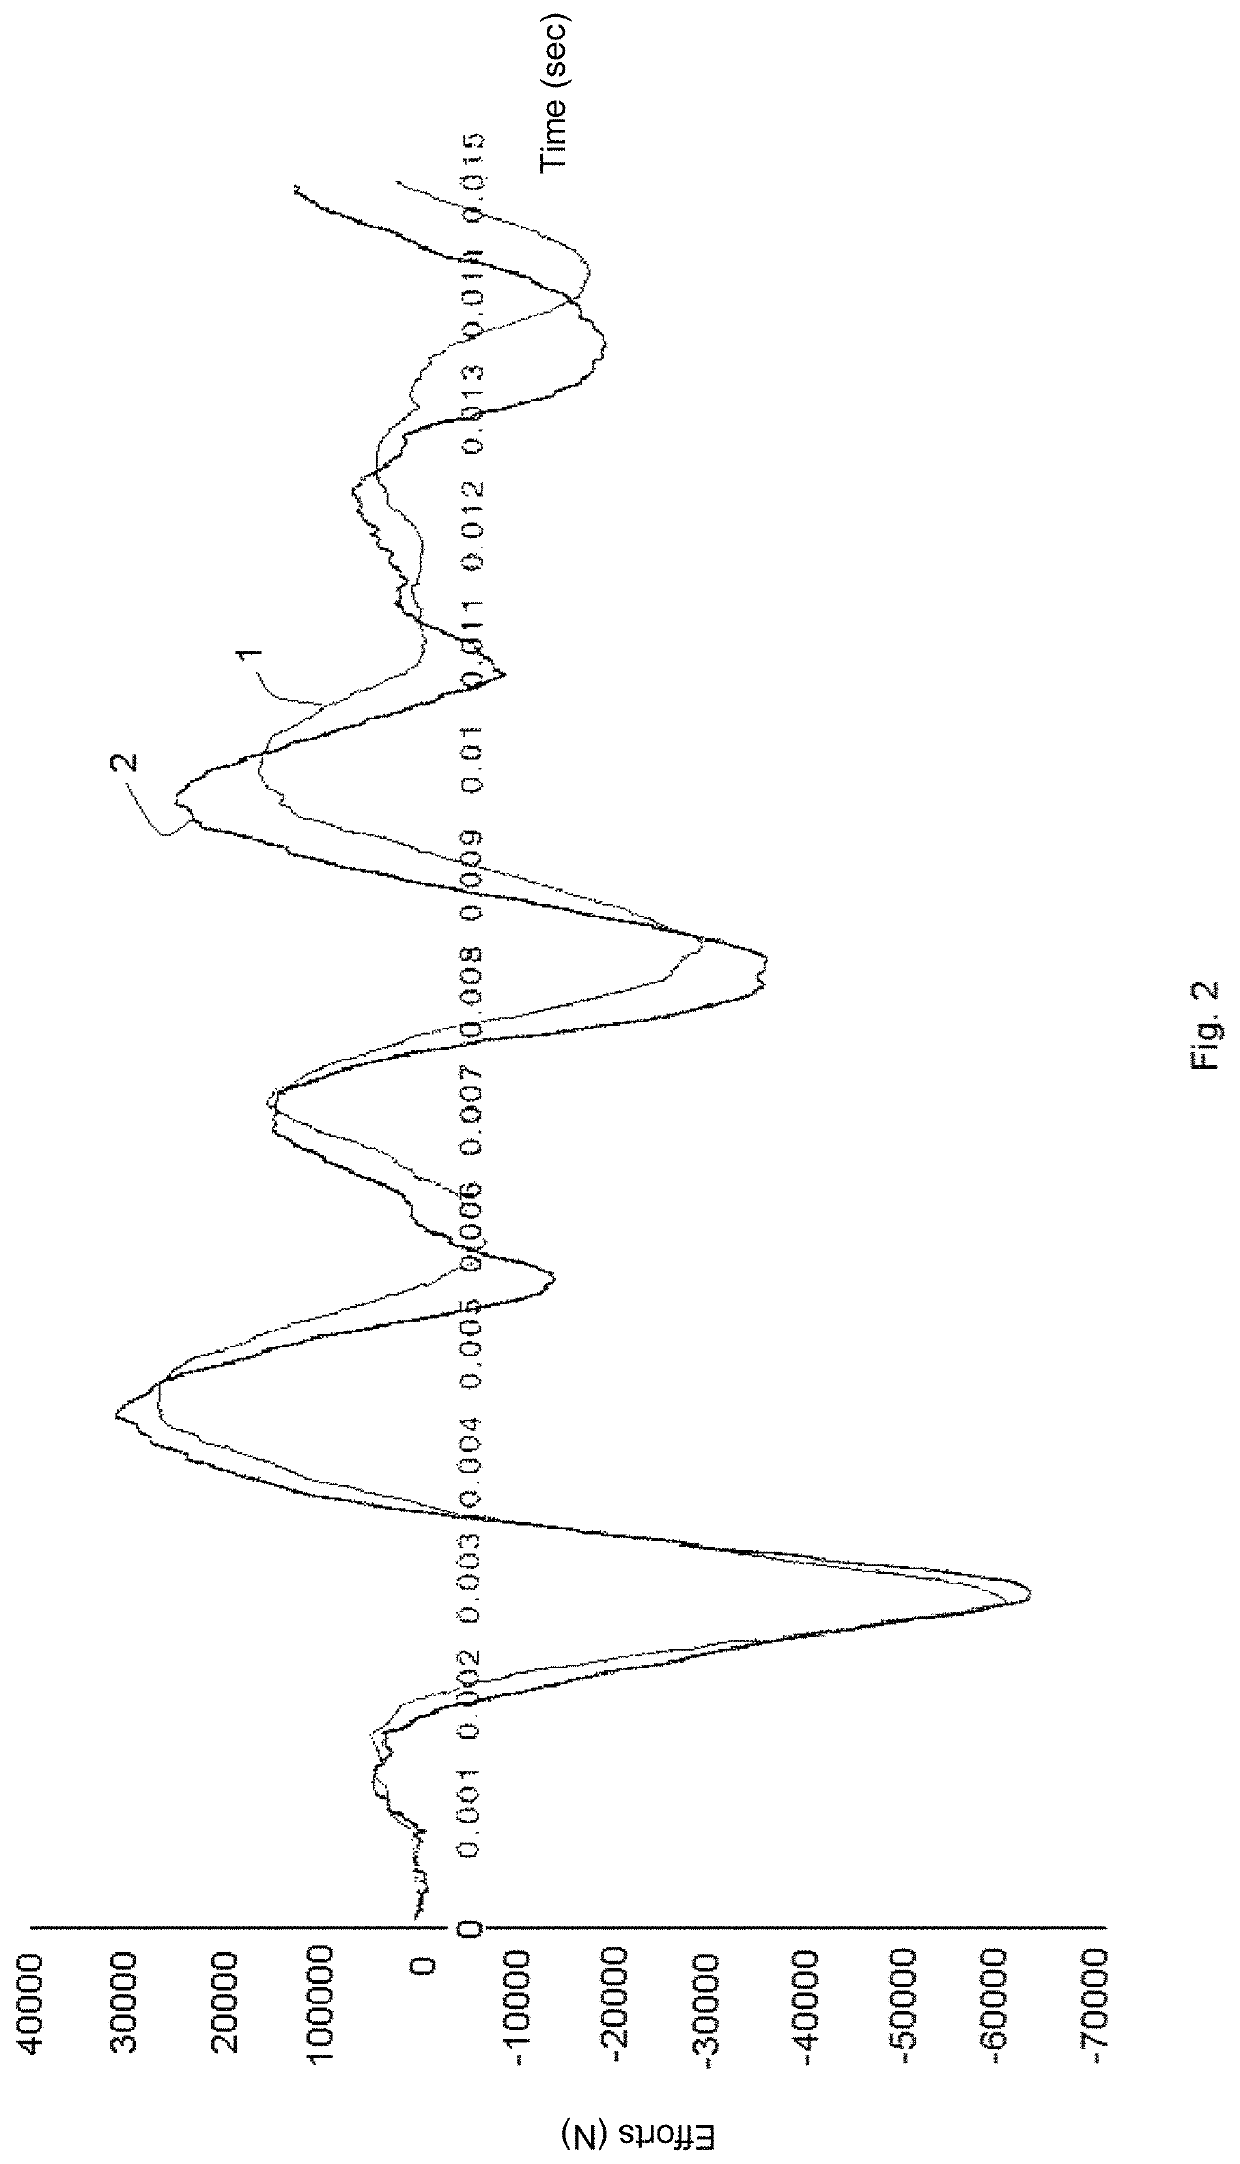 Solid projectile without stabilizing structure for bird strike tests consisting of a gel comprising glycerol